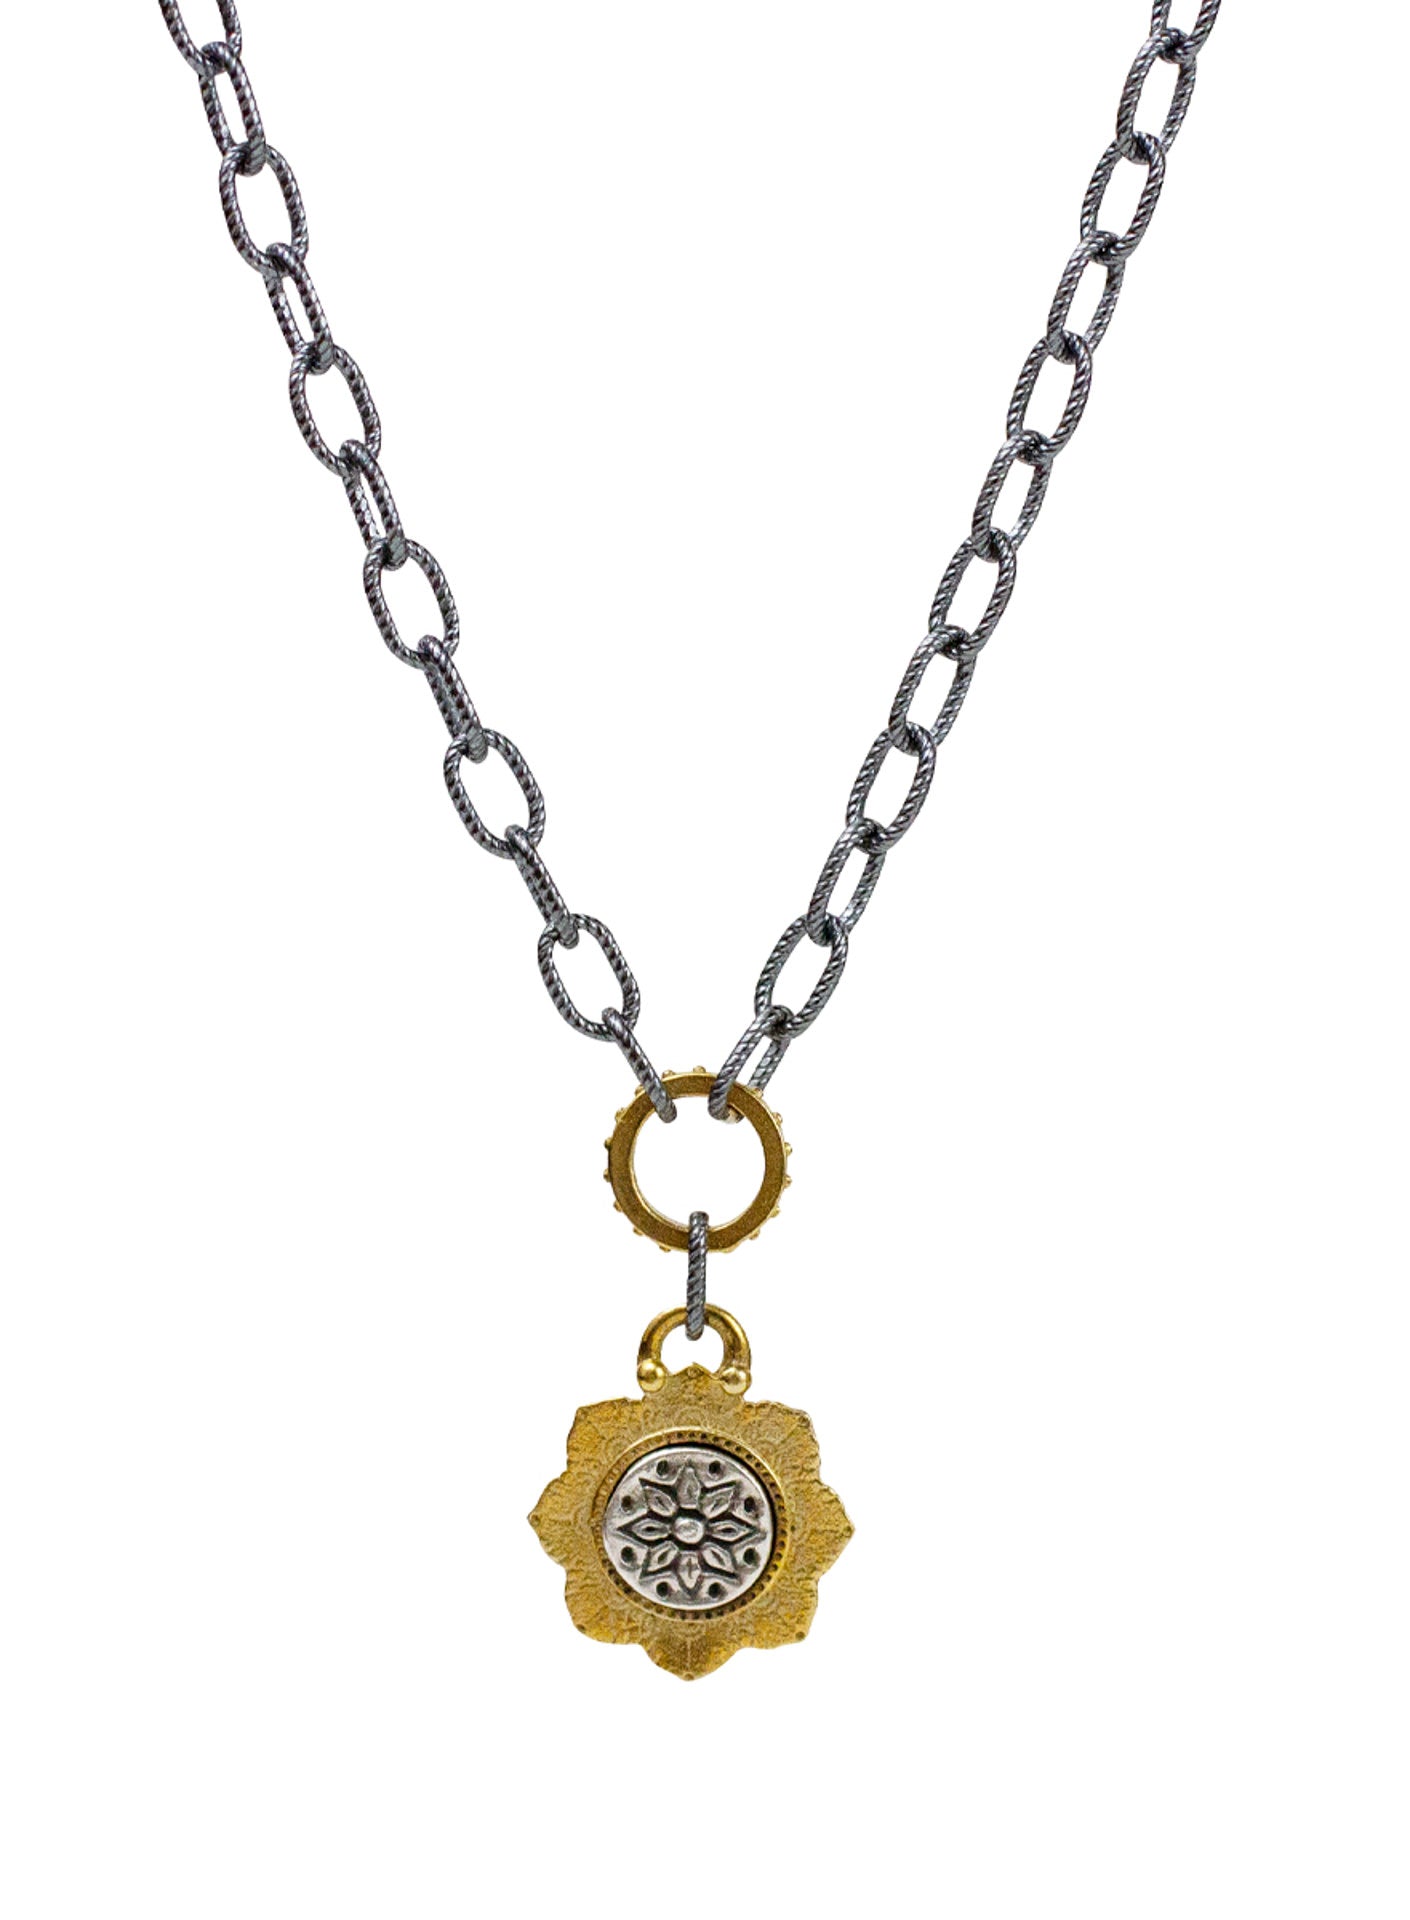 Channel Necklace - Dhyana "seek your center"